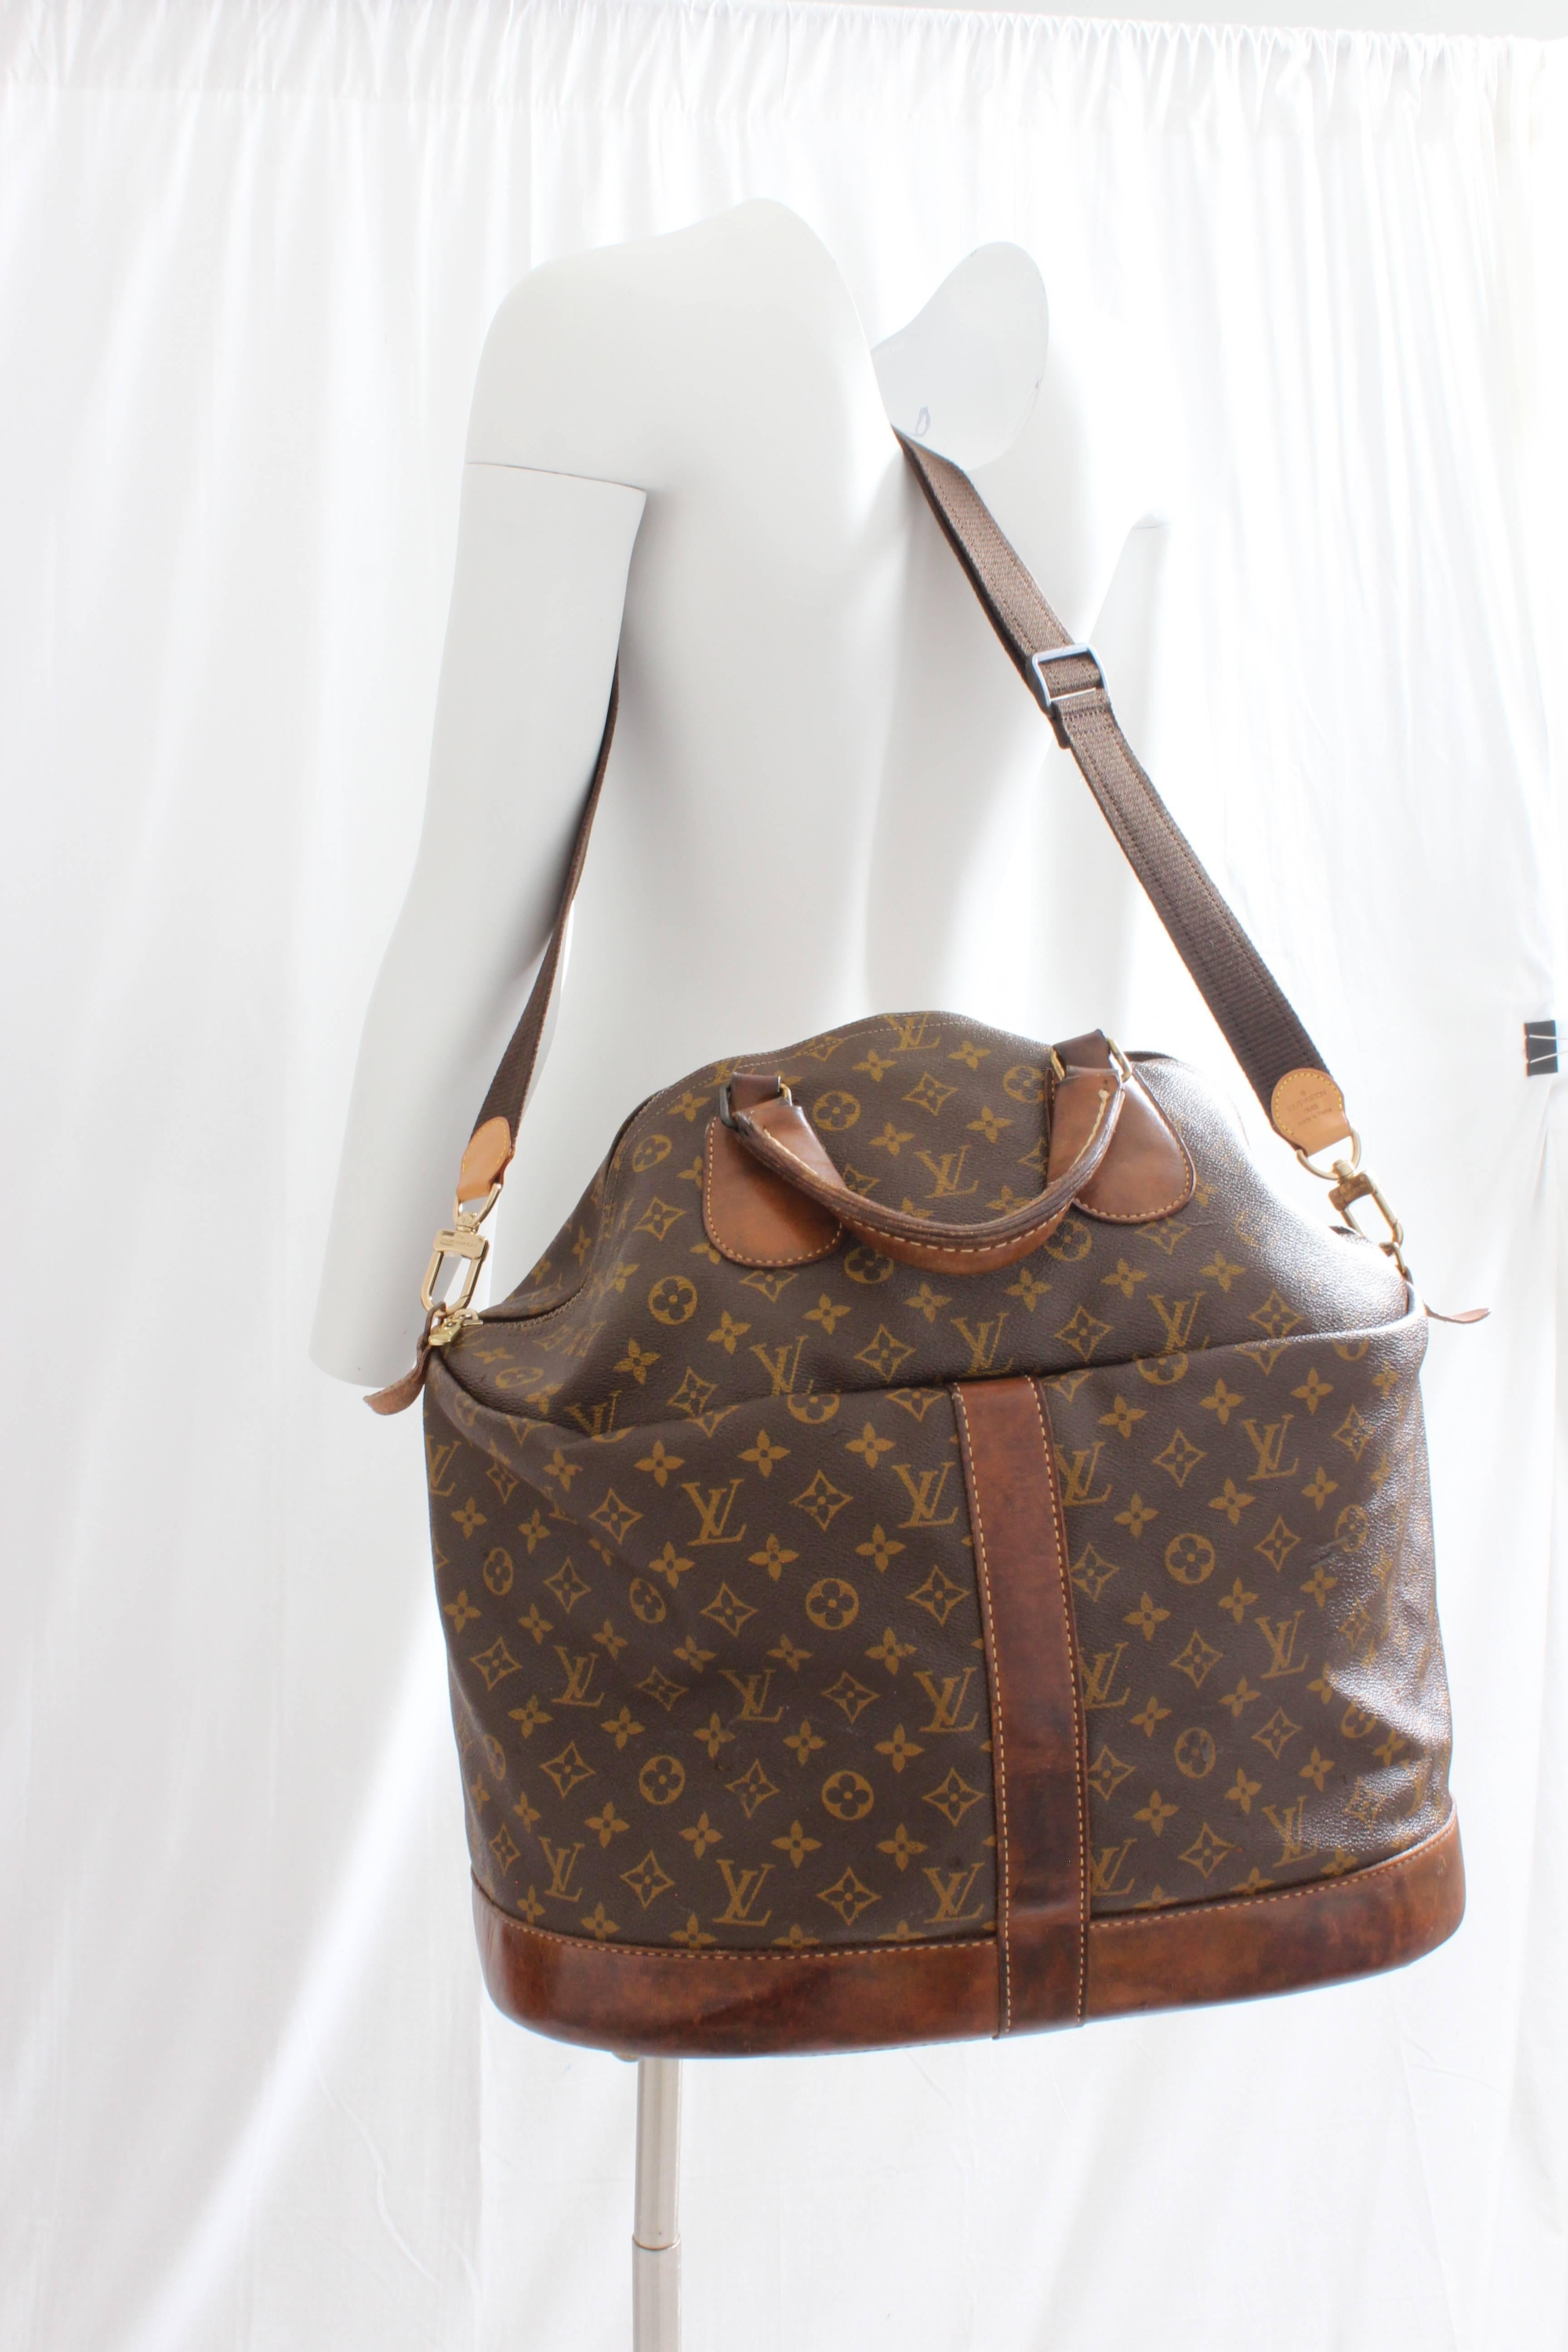 Louis Vuitton Large Steamer Bag Keepall Monogram Travel Tote French Company 70s  3